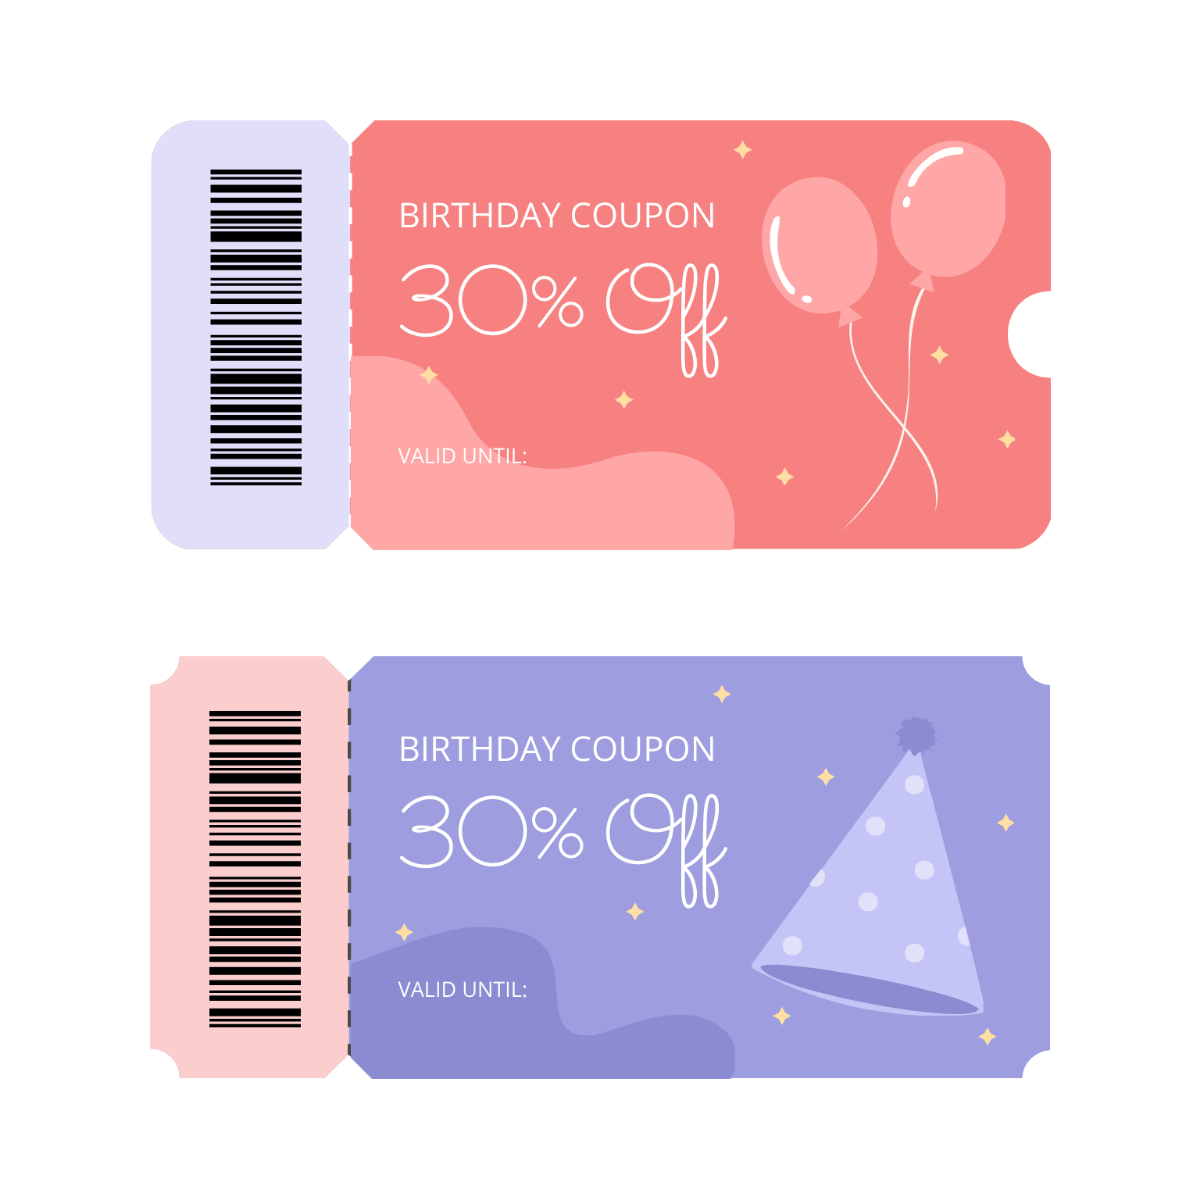 Birthday Coupon Vector Template